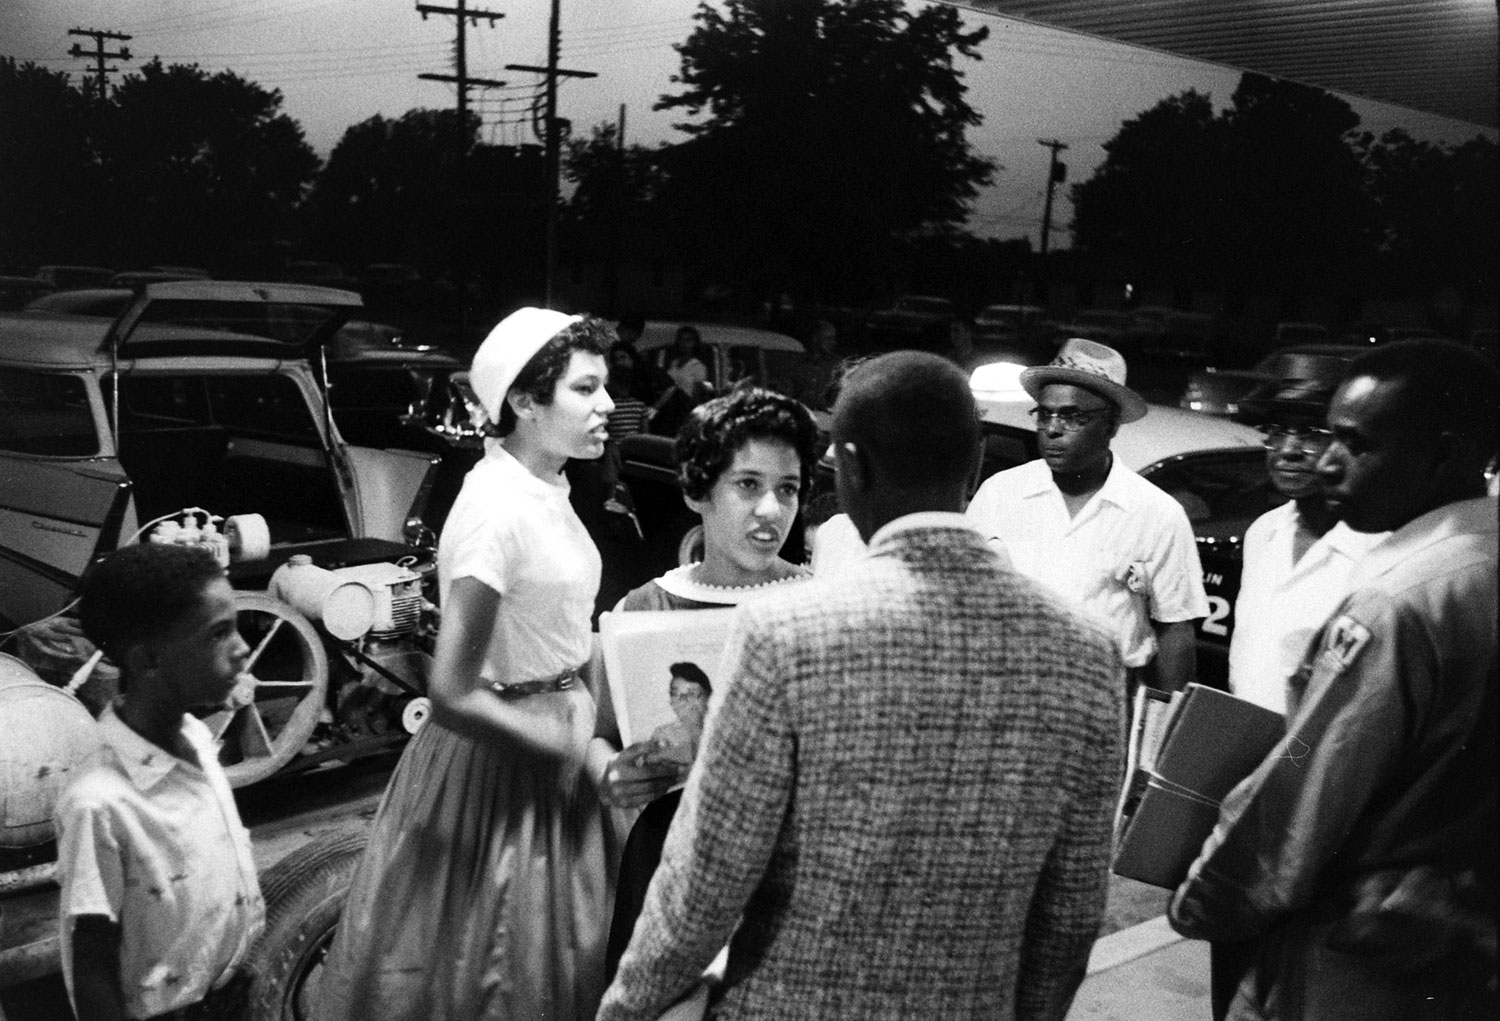 African-American students who were refused admission to their high school football game, Little Rock, Arkansas, 1957.